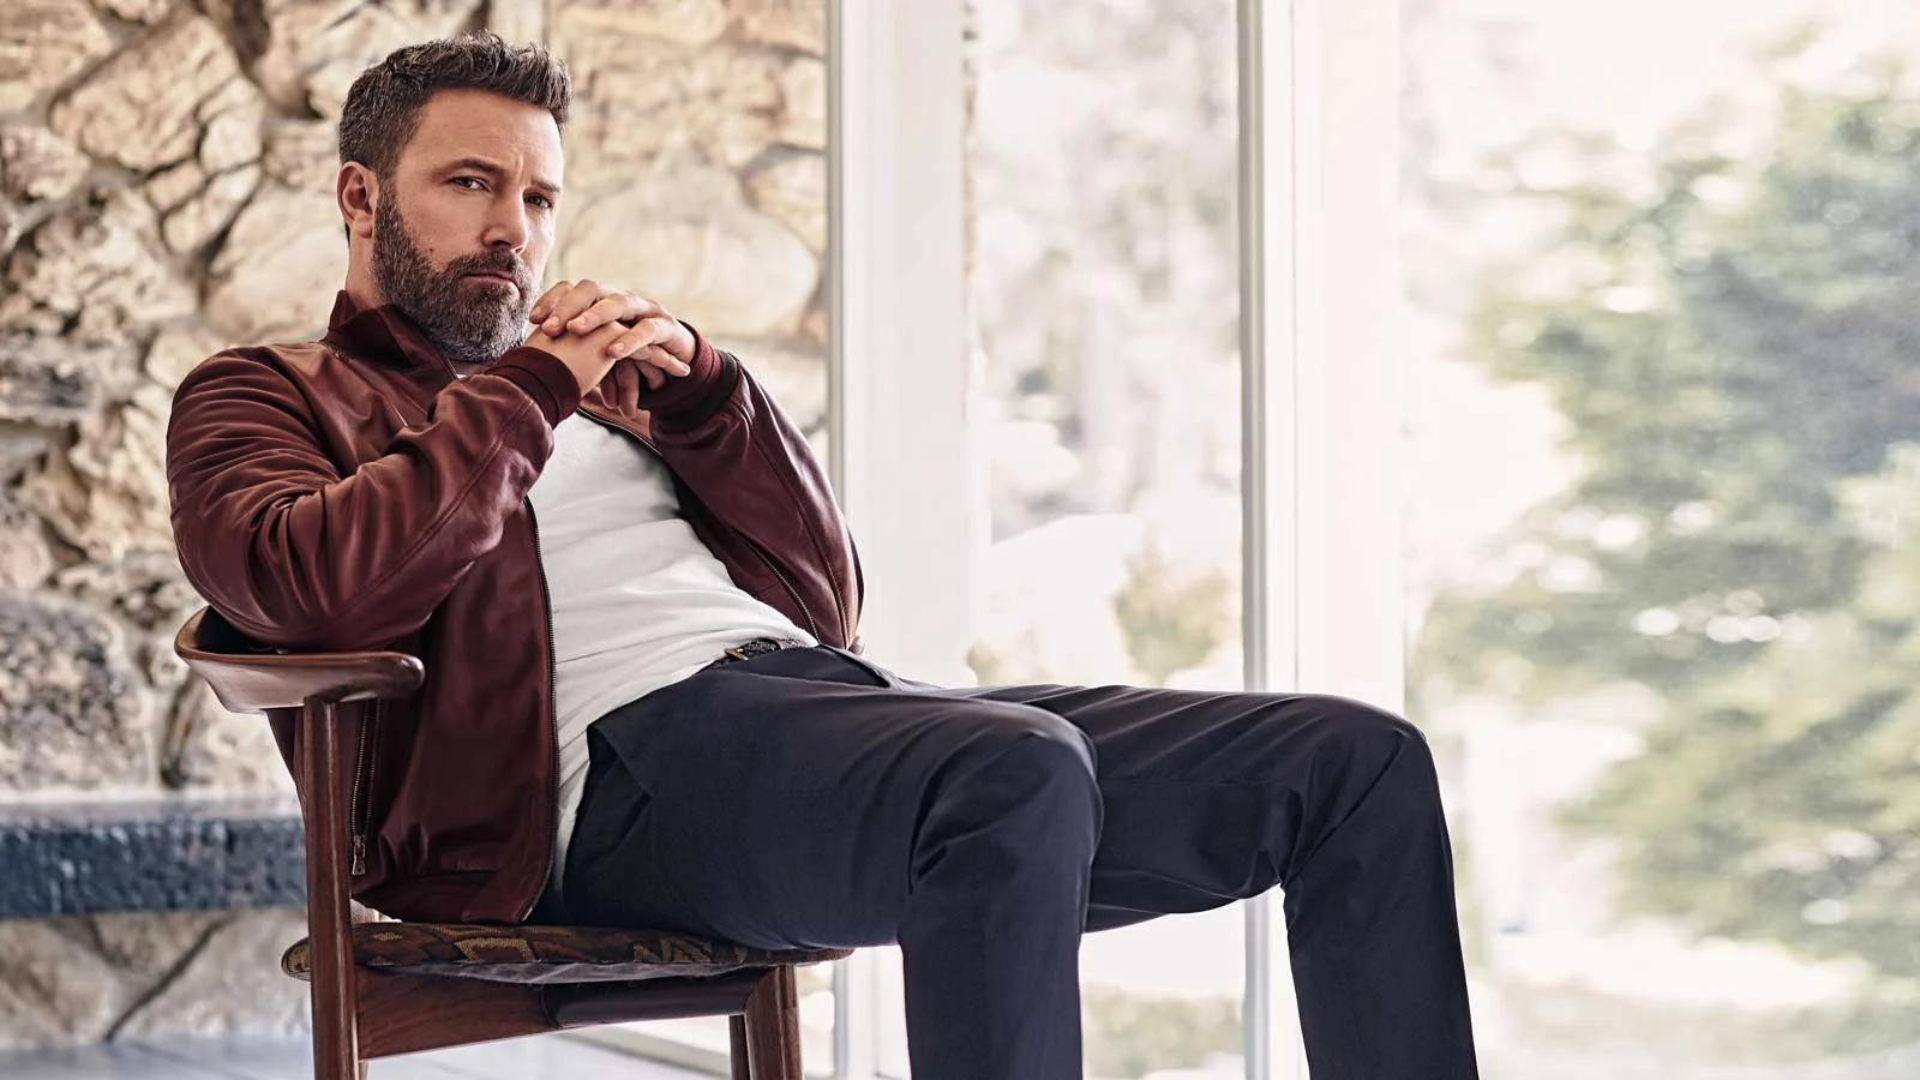 Serious looking Ben Affleck sitting on the wooden chair 